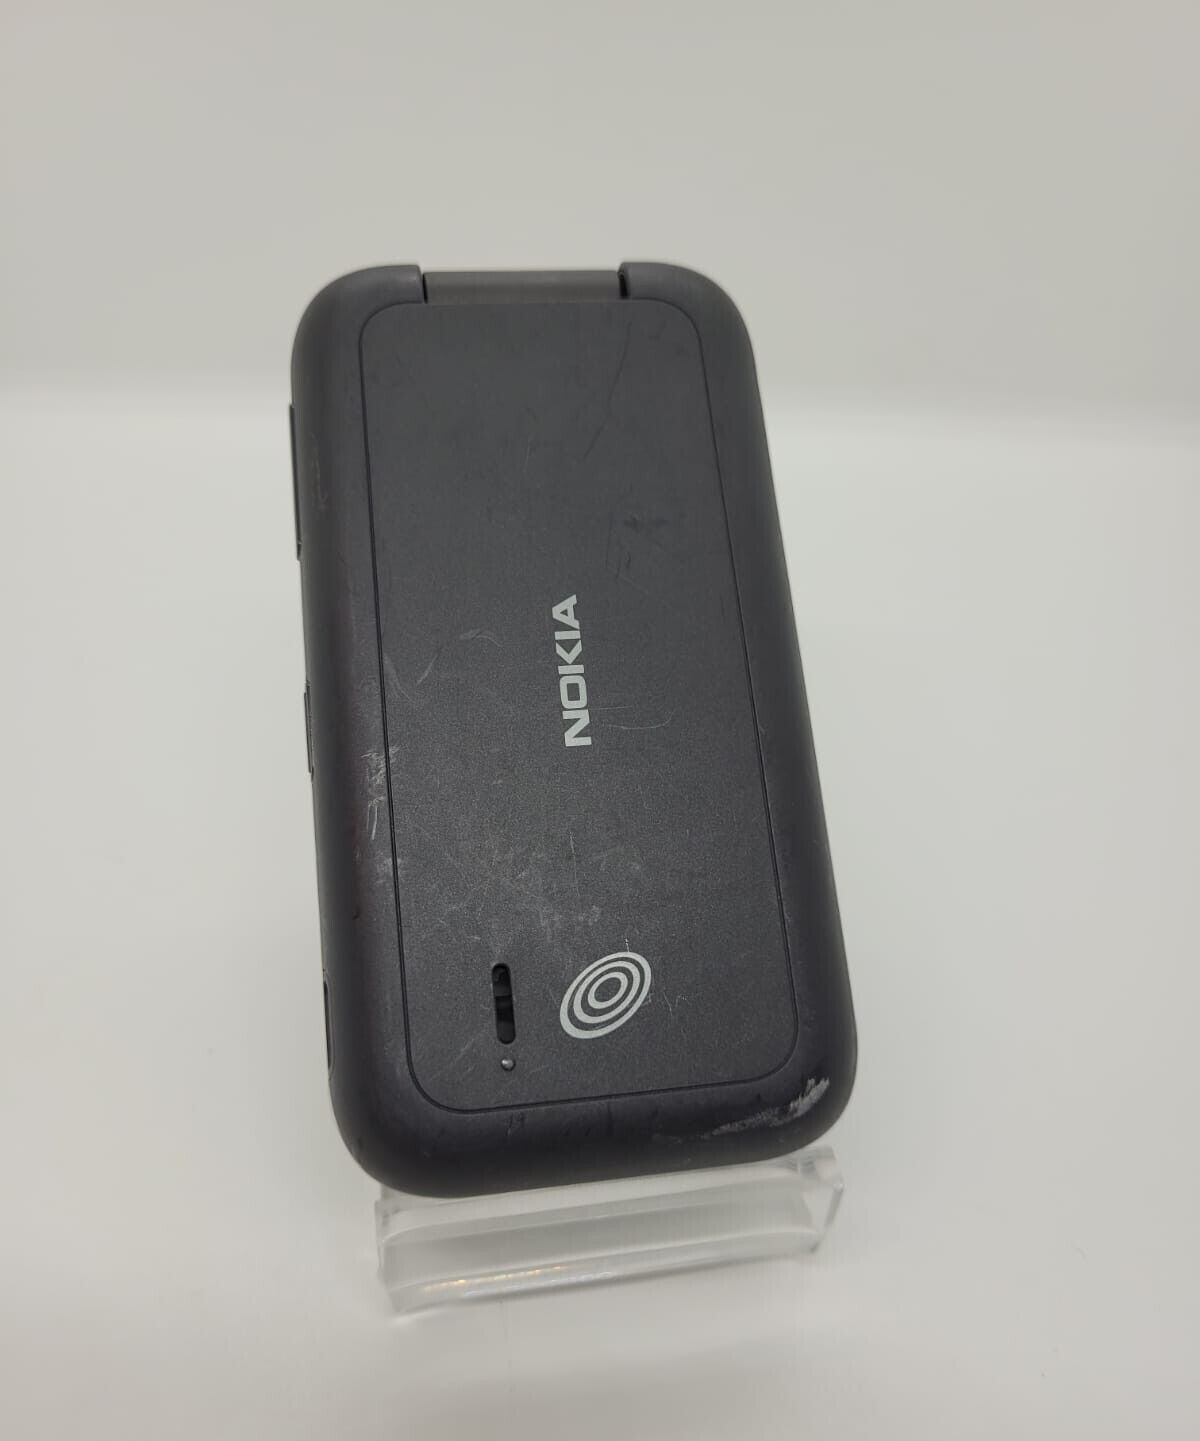 Nokia 2760 Flip 4G Black Tracfone Flip Phone N139DL FOR PARTS